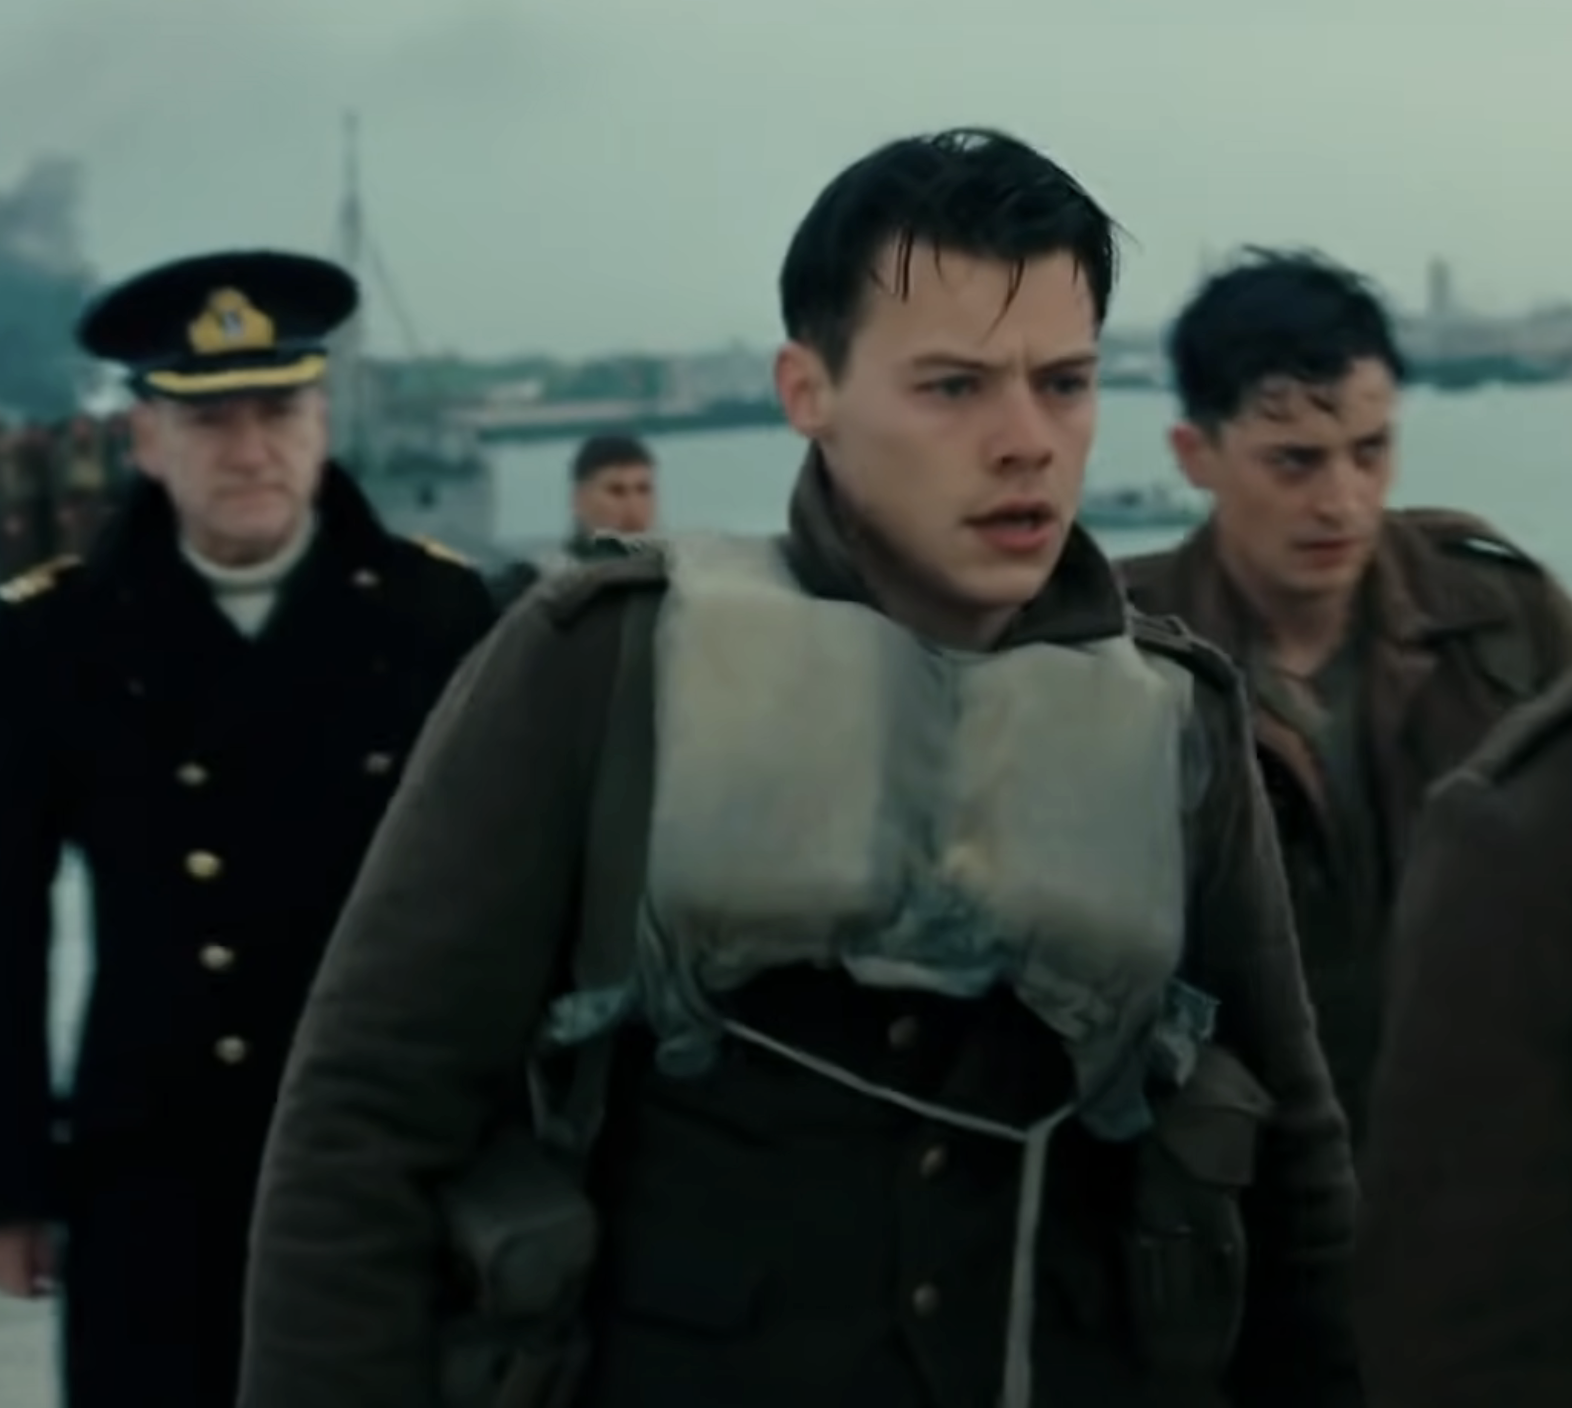 harry wearing a life vest and military uniform in the film